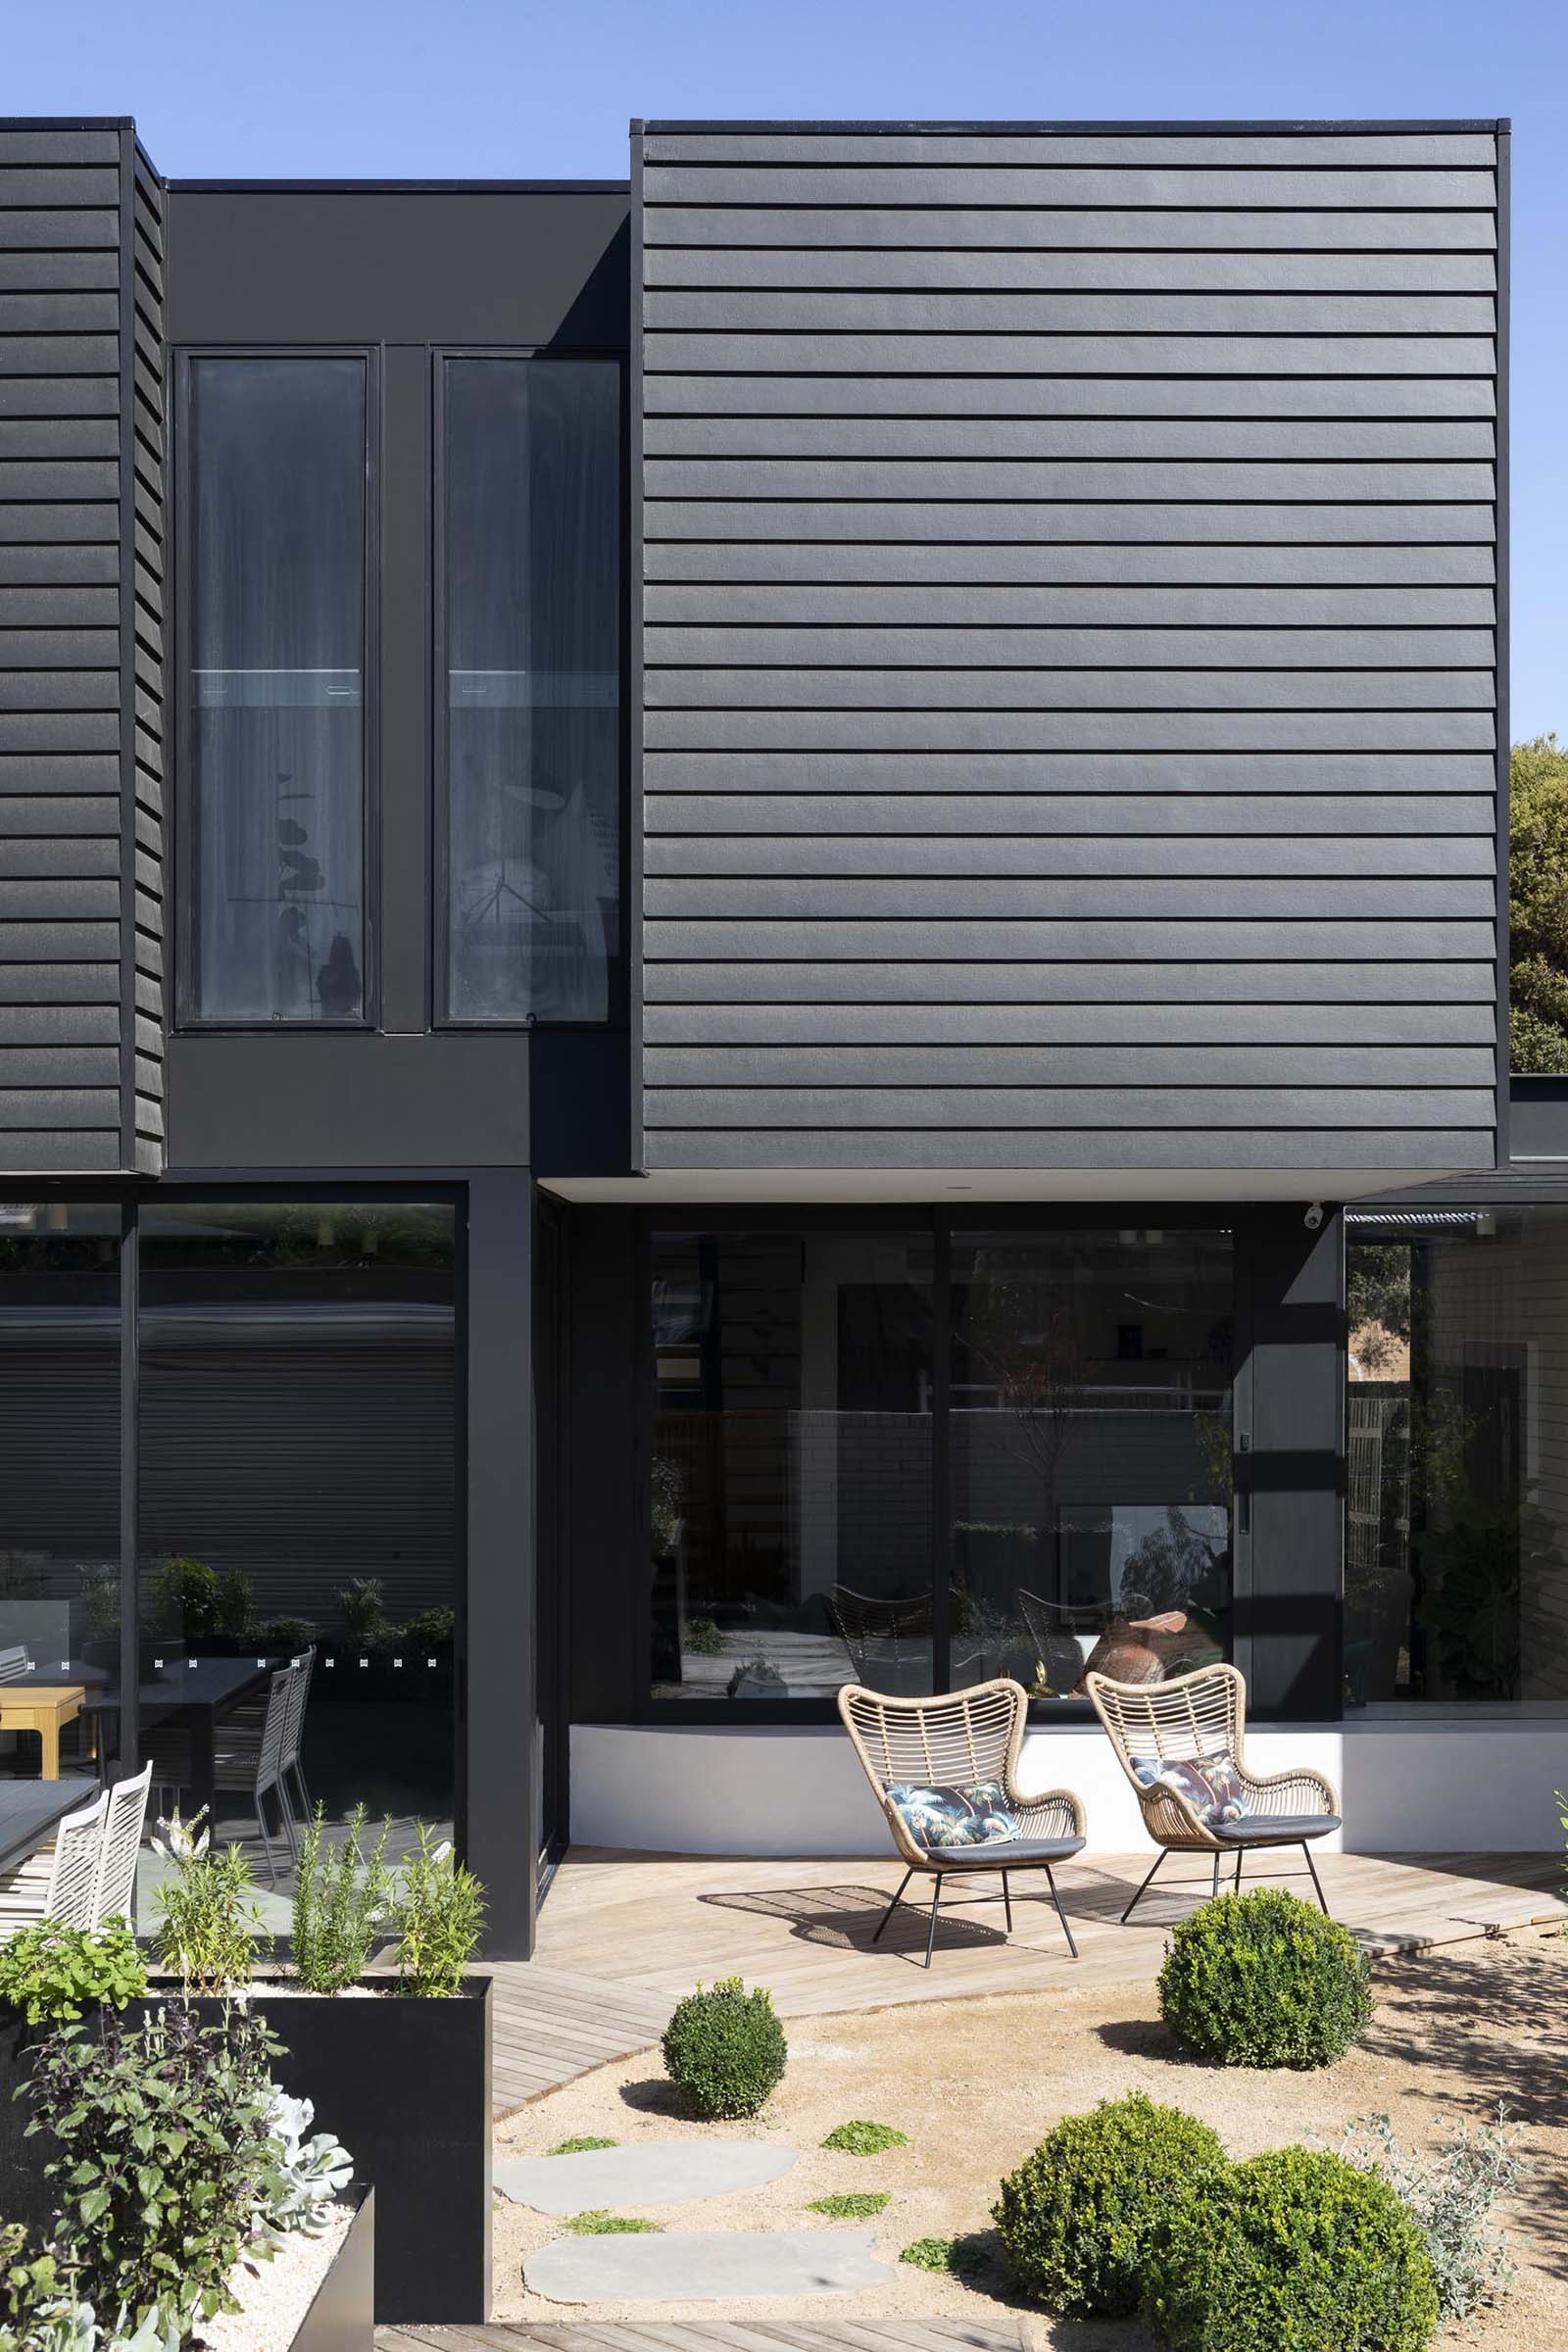 A modern house extension that has a black facade, a landscaped yard with a bbq, outdoor dining area, and patio.